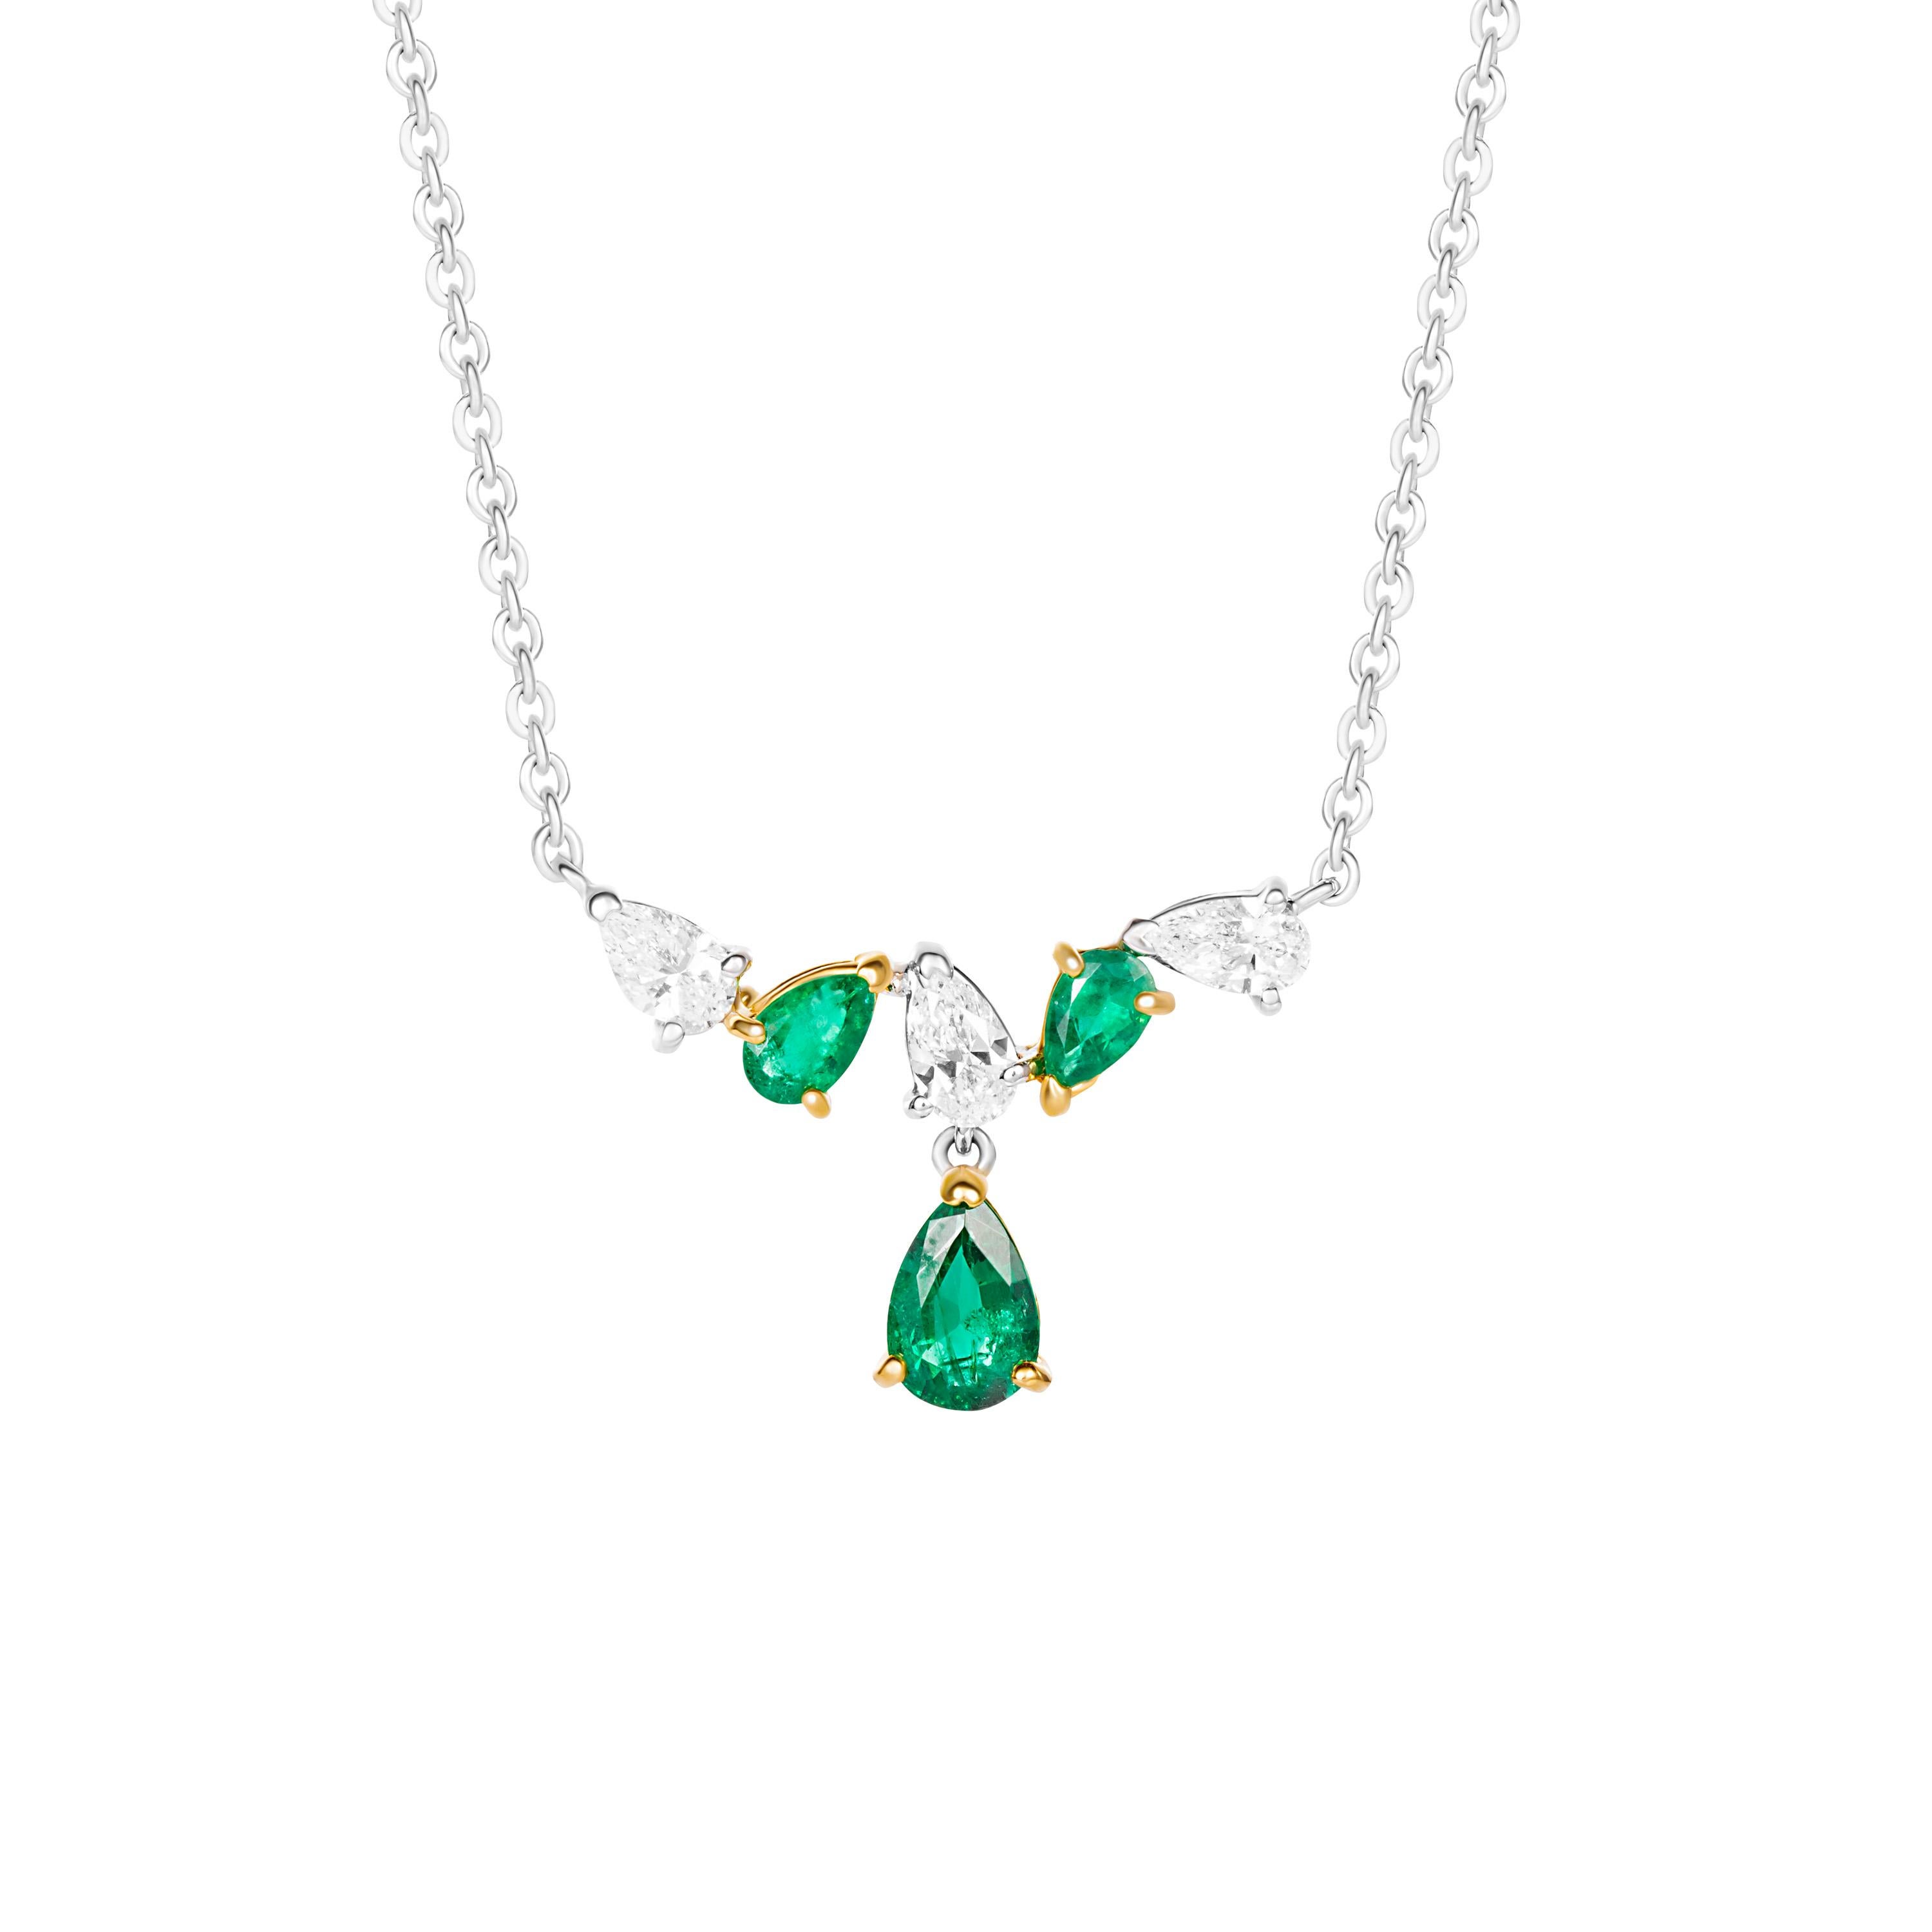 Butani's necklace is made from two-tone 18-karat white and yellow gold and encrusted with 0.89 carats of pear-cut emeralds and 0.60 carats of pear-cut diamonds.  A single rose-cut round diamond (0.07 carats) sits delicately on the chain.  Chain